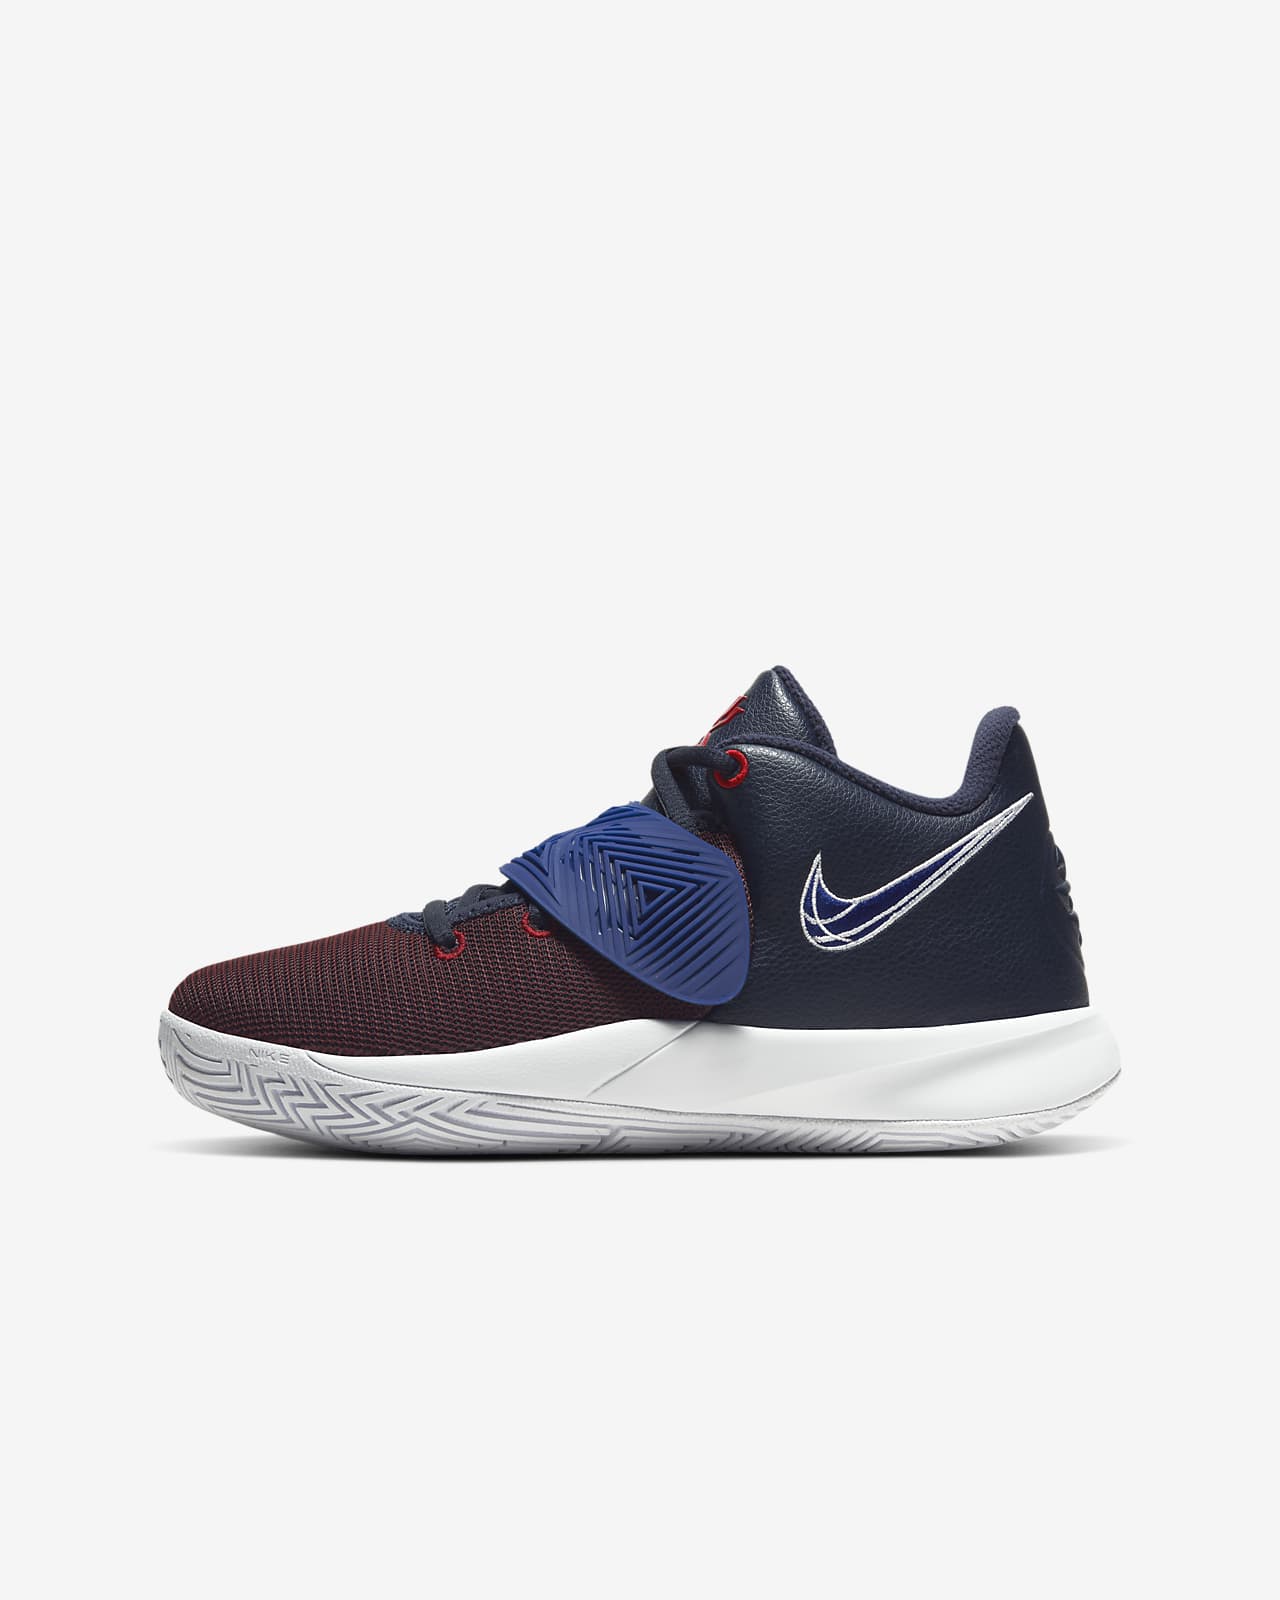 kyrie 3 shoes philippines